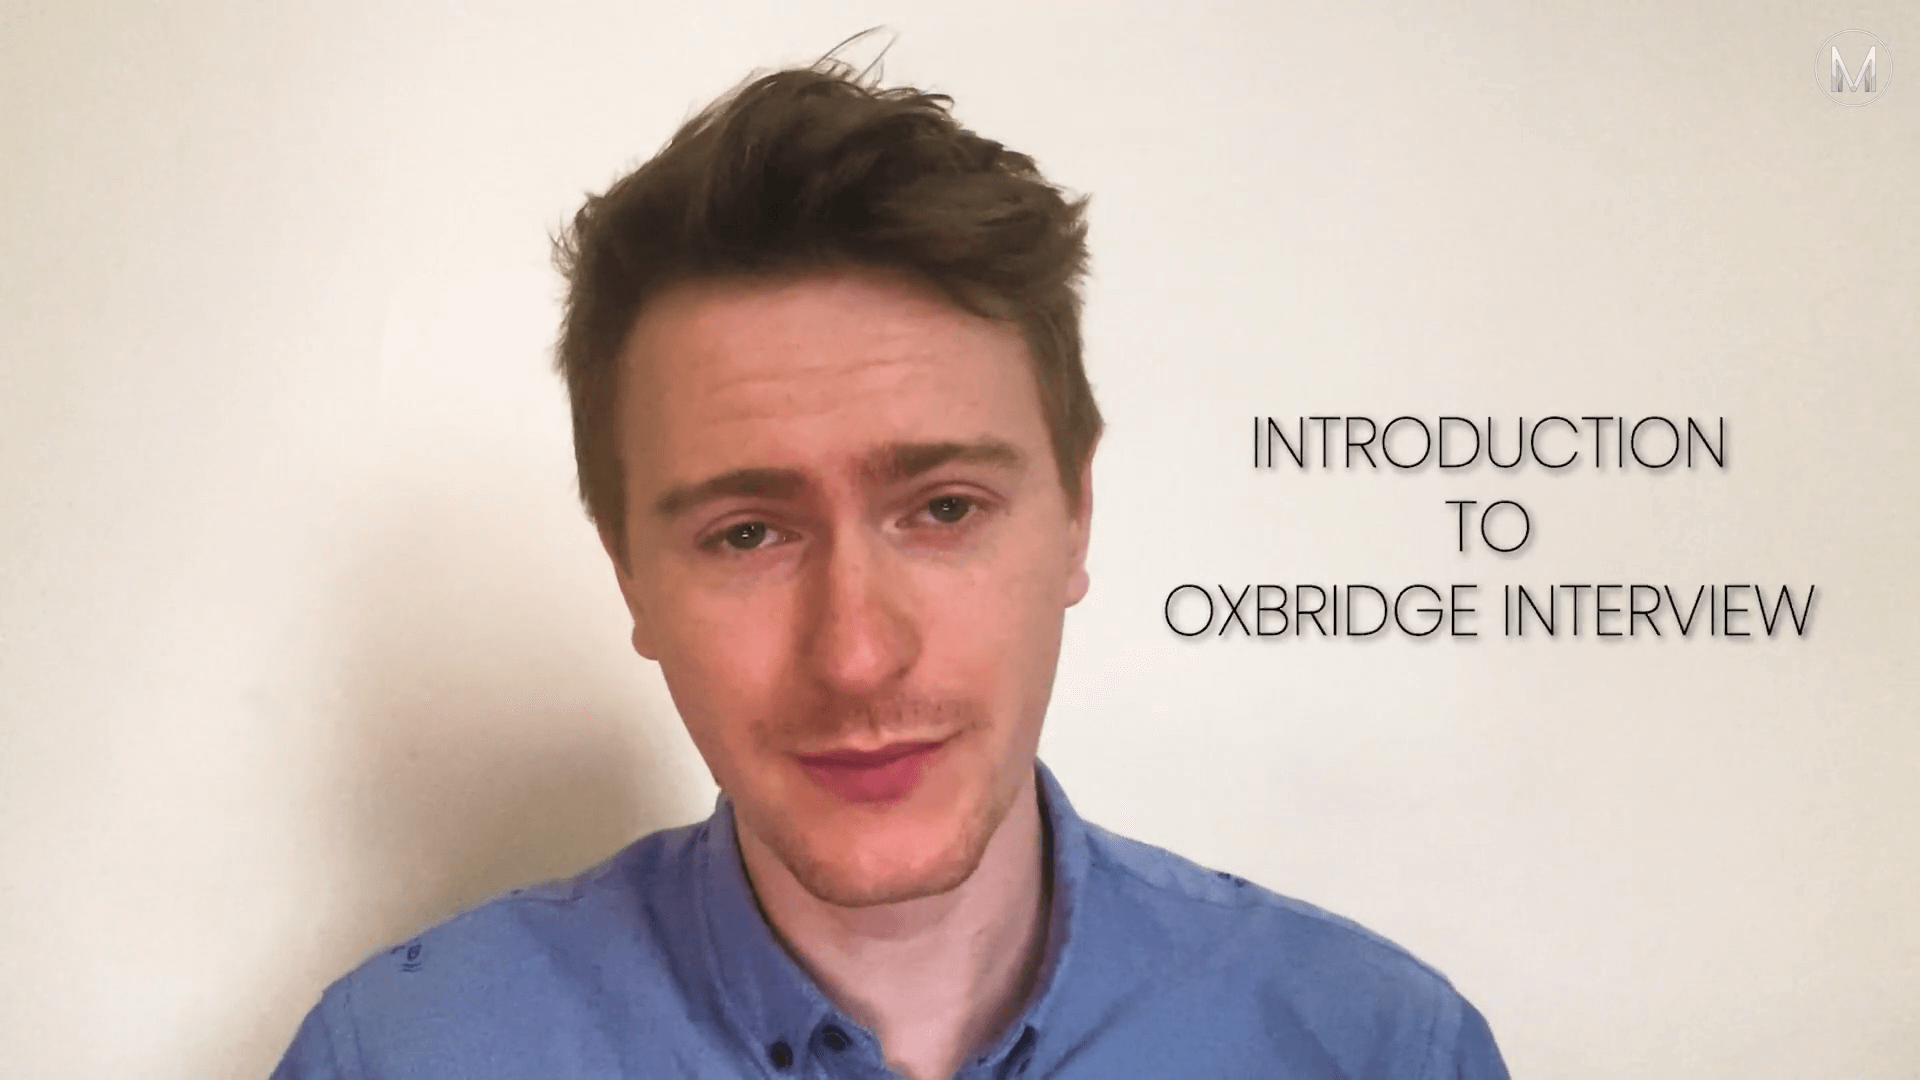 An Introduction to Oxbridge